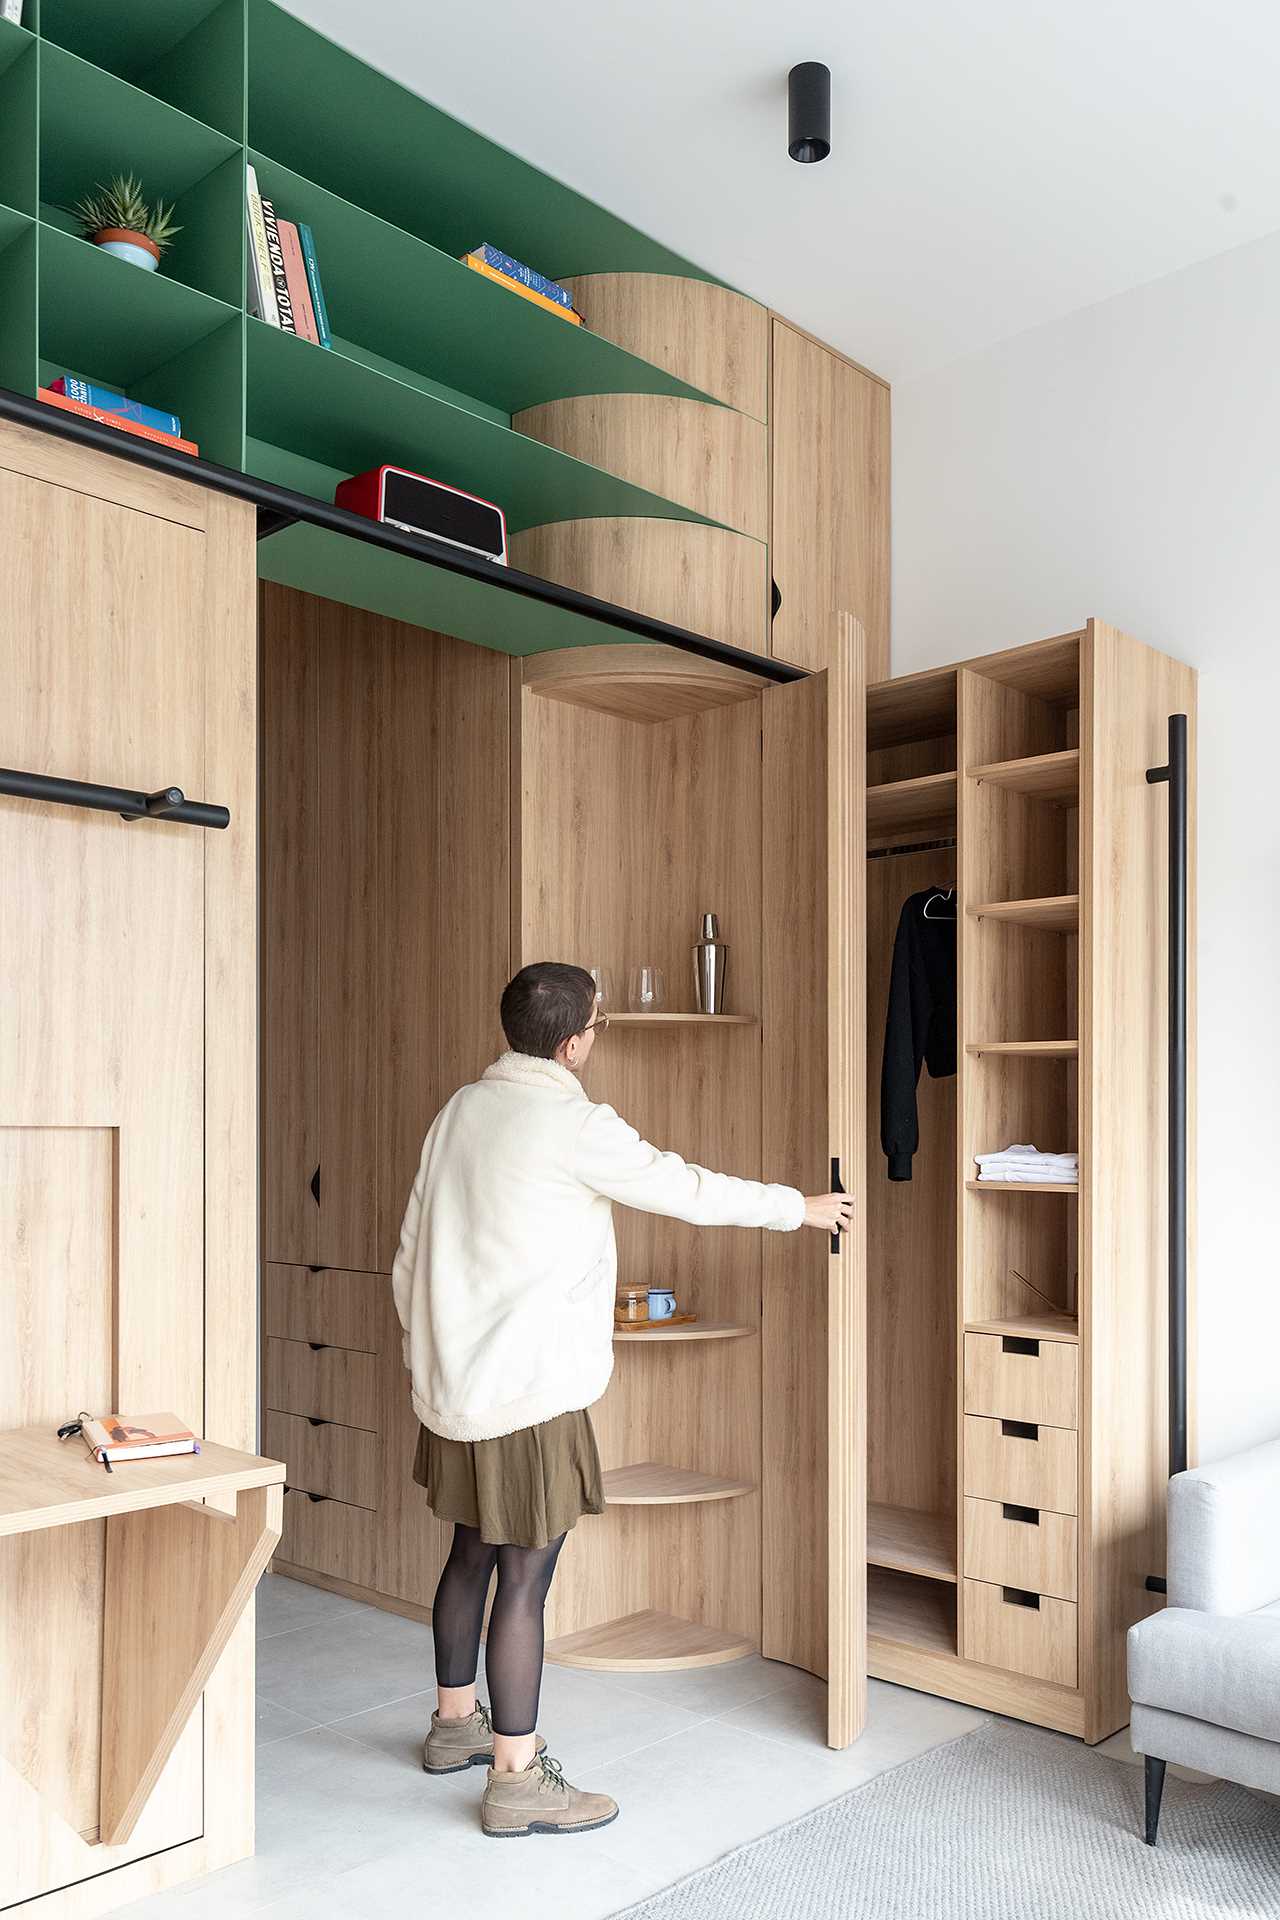 The corner has been softened with a curved cabinet that opens to shelving.